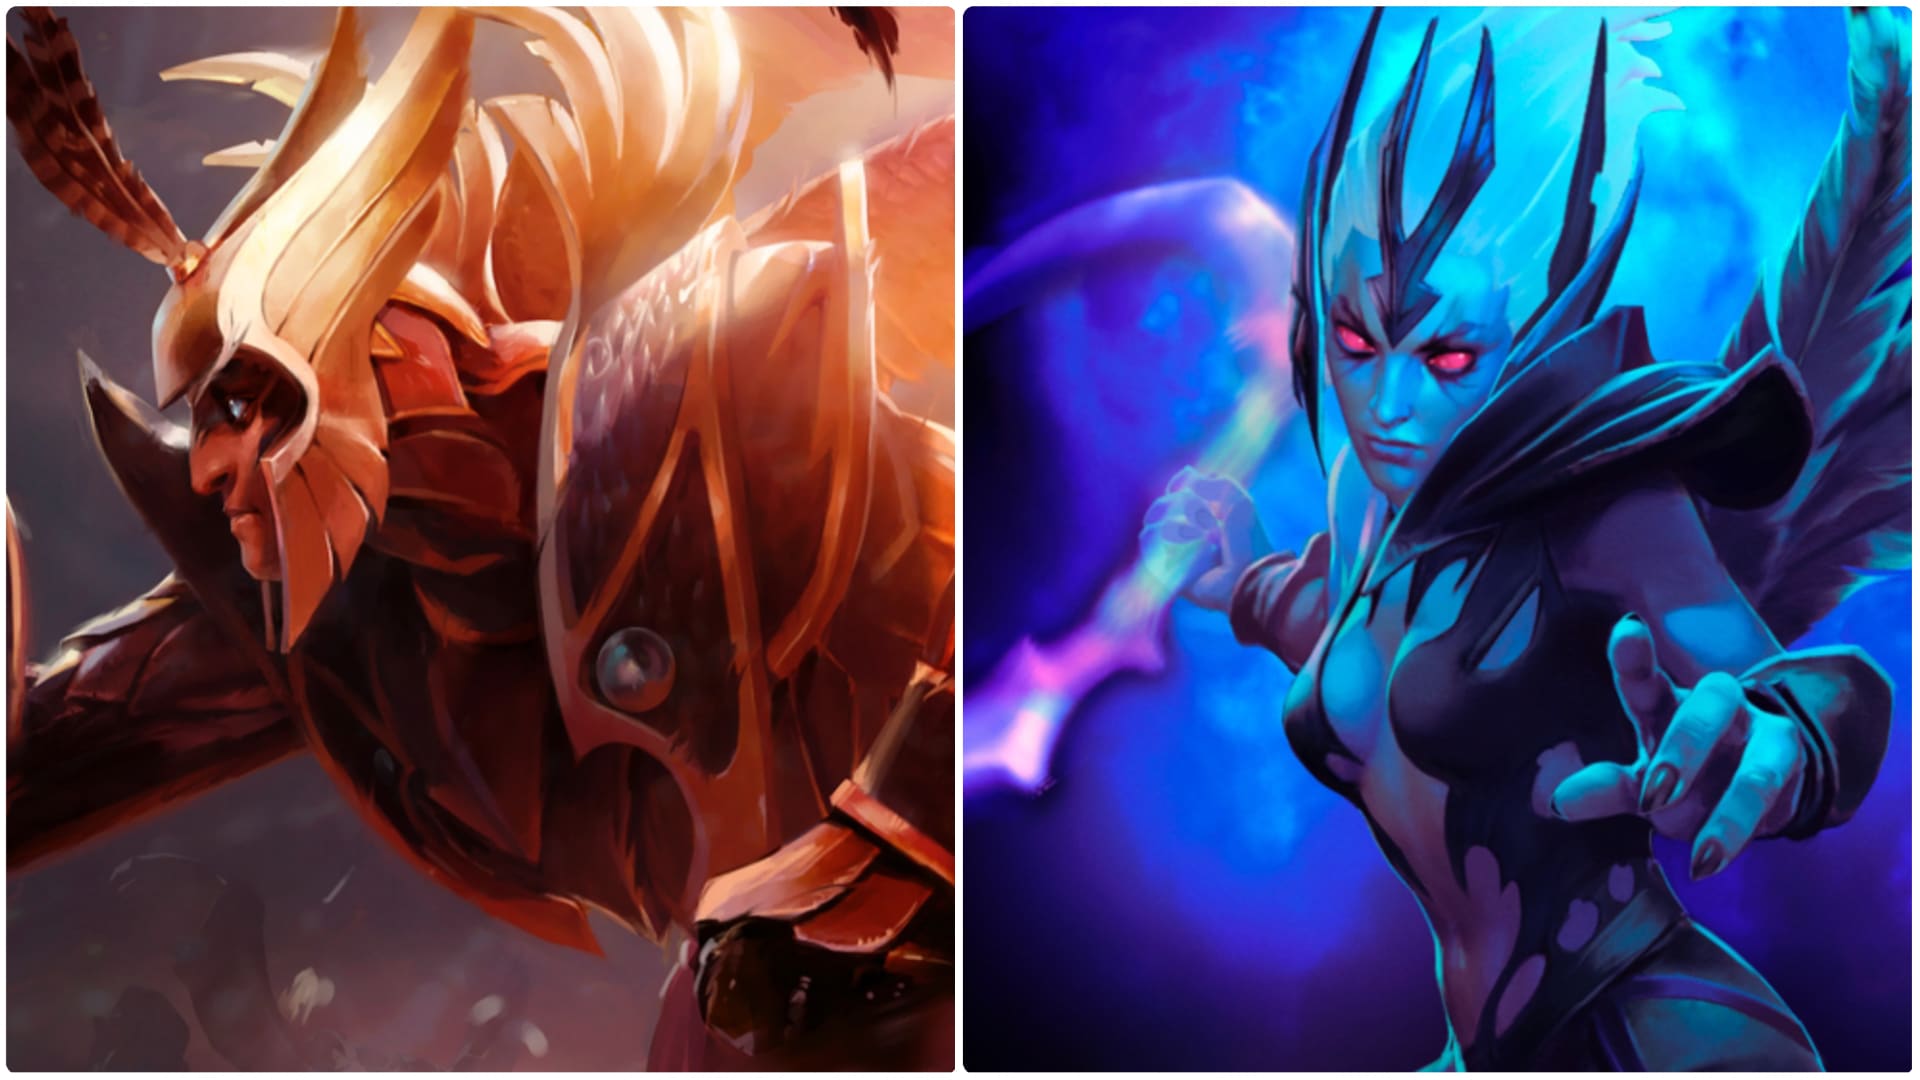 Skywrath Mage and Vengeful Spirit fight to annihilate enemy heroes in Dota 2